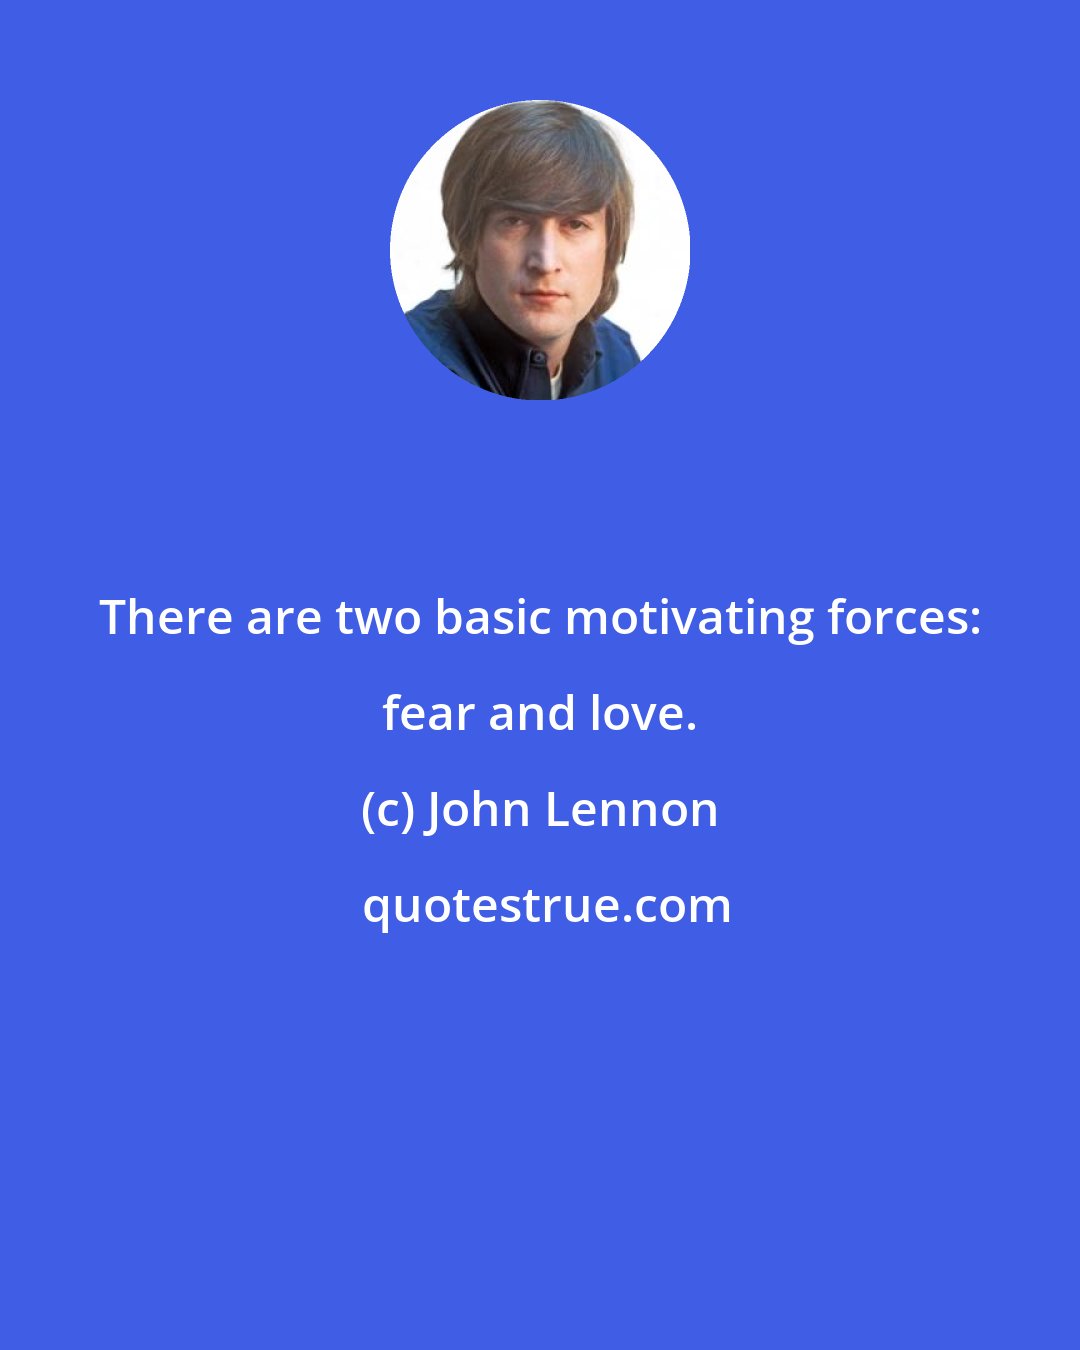 John Lennon: There are two basic motivating forces: fear and love.